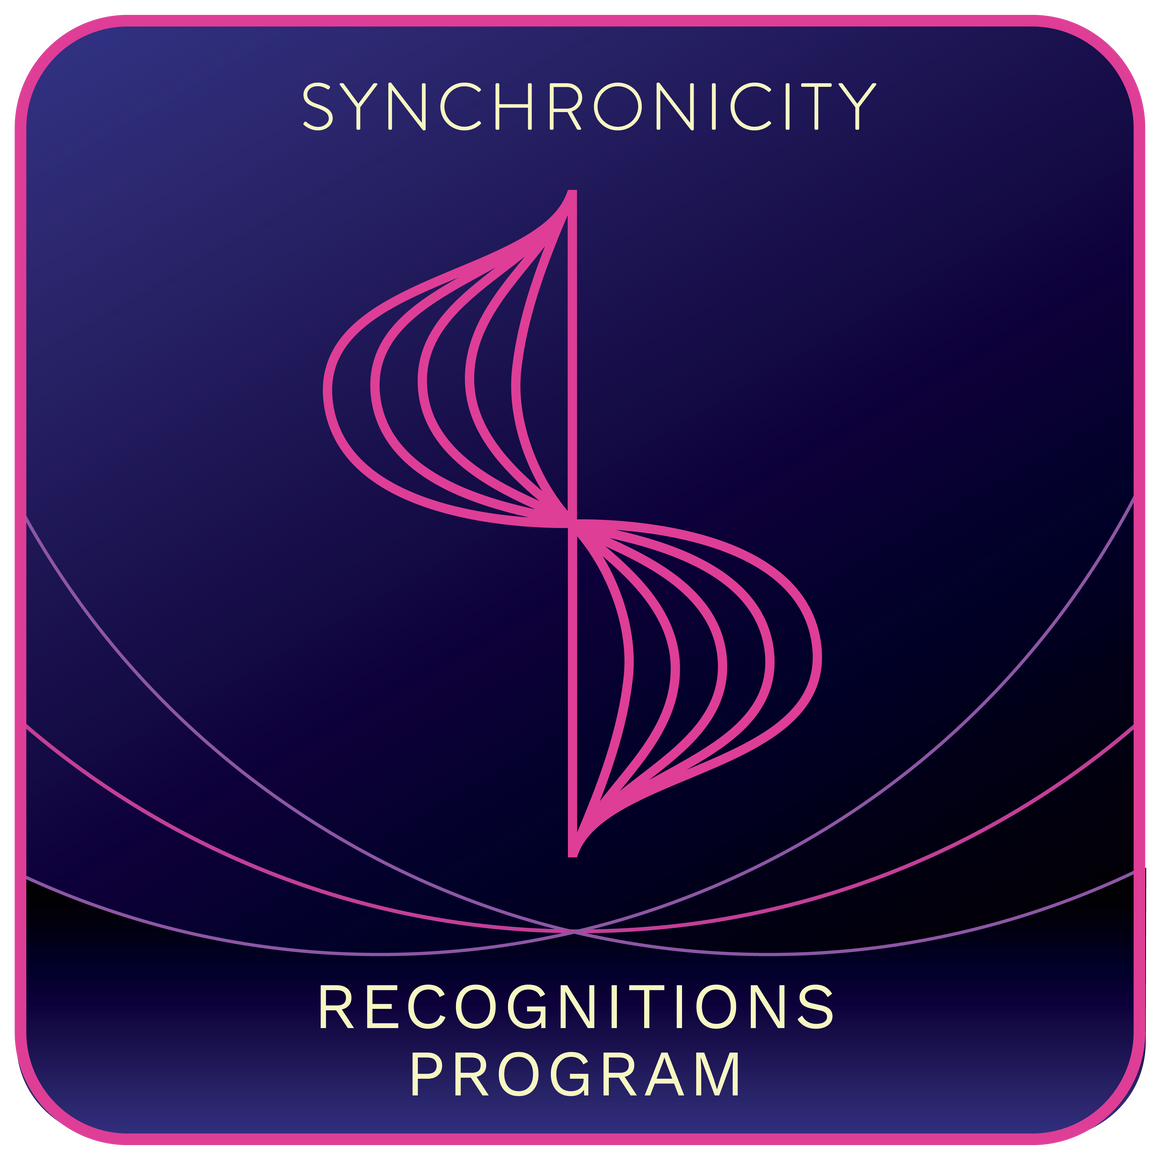 Recognitions Program Phase 1